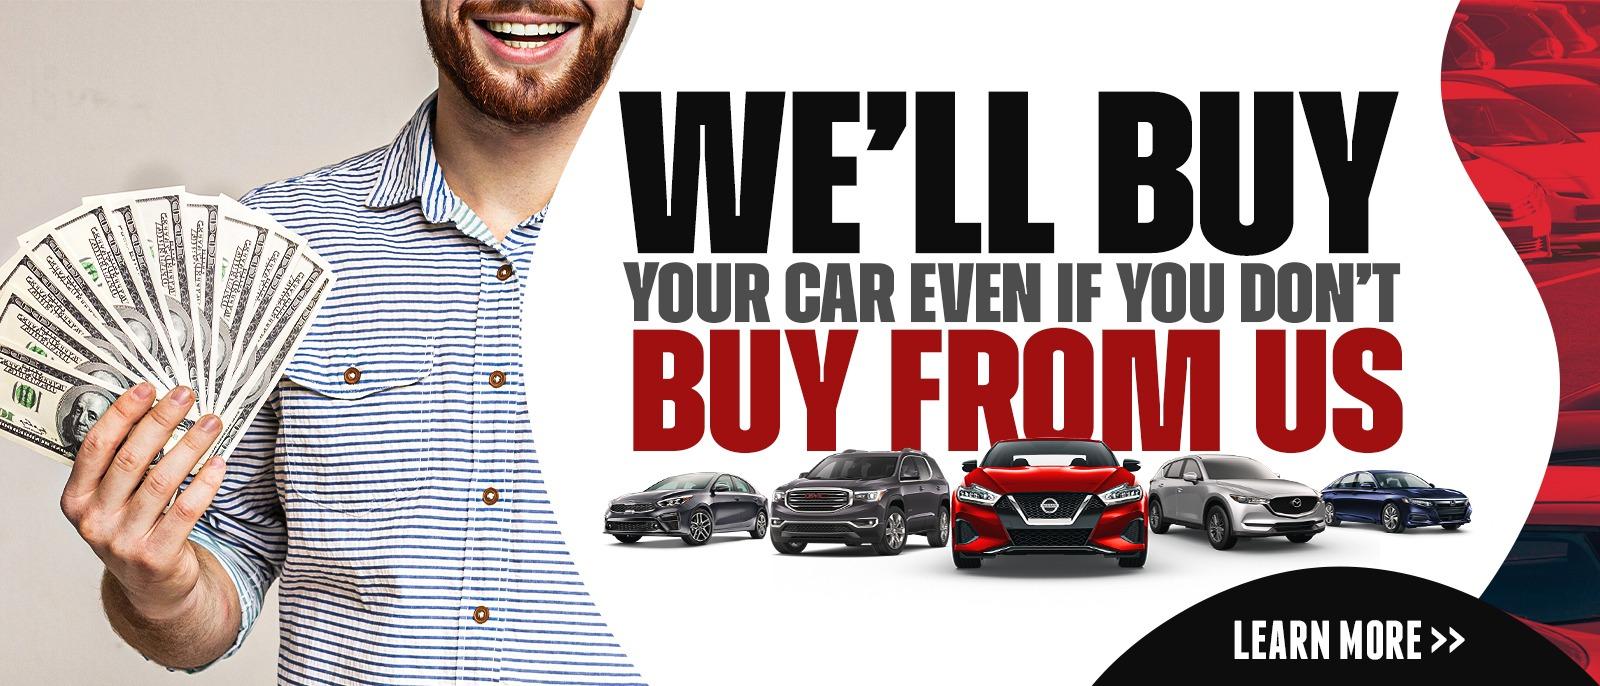 We'll buy your car even if you don't buy from us! Value your trade-in today at Jerry's Chevrolet.